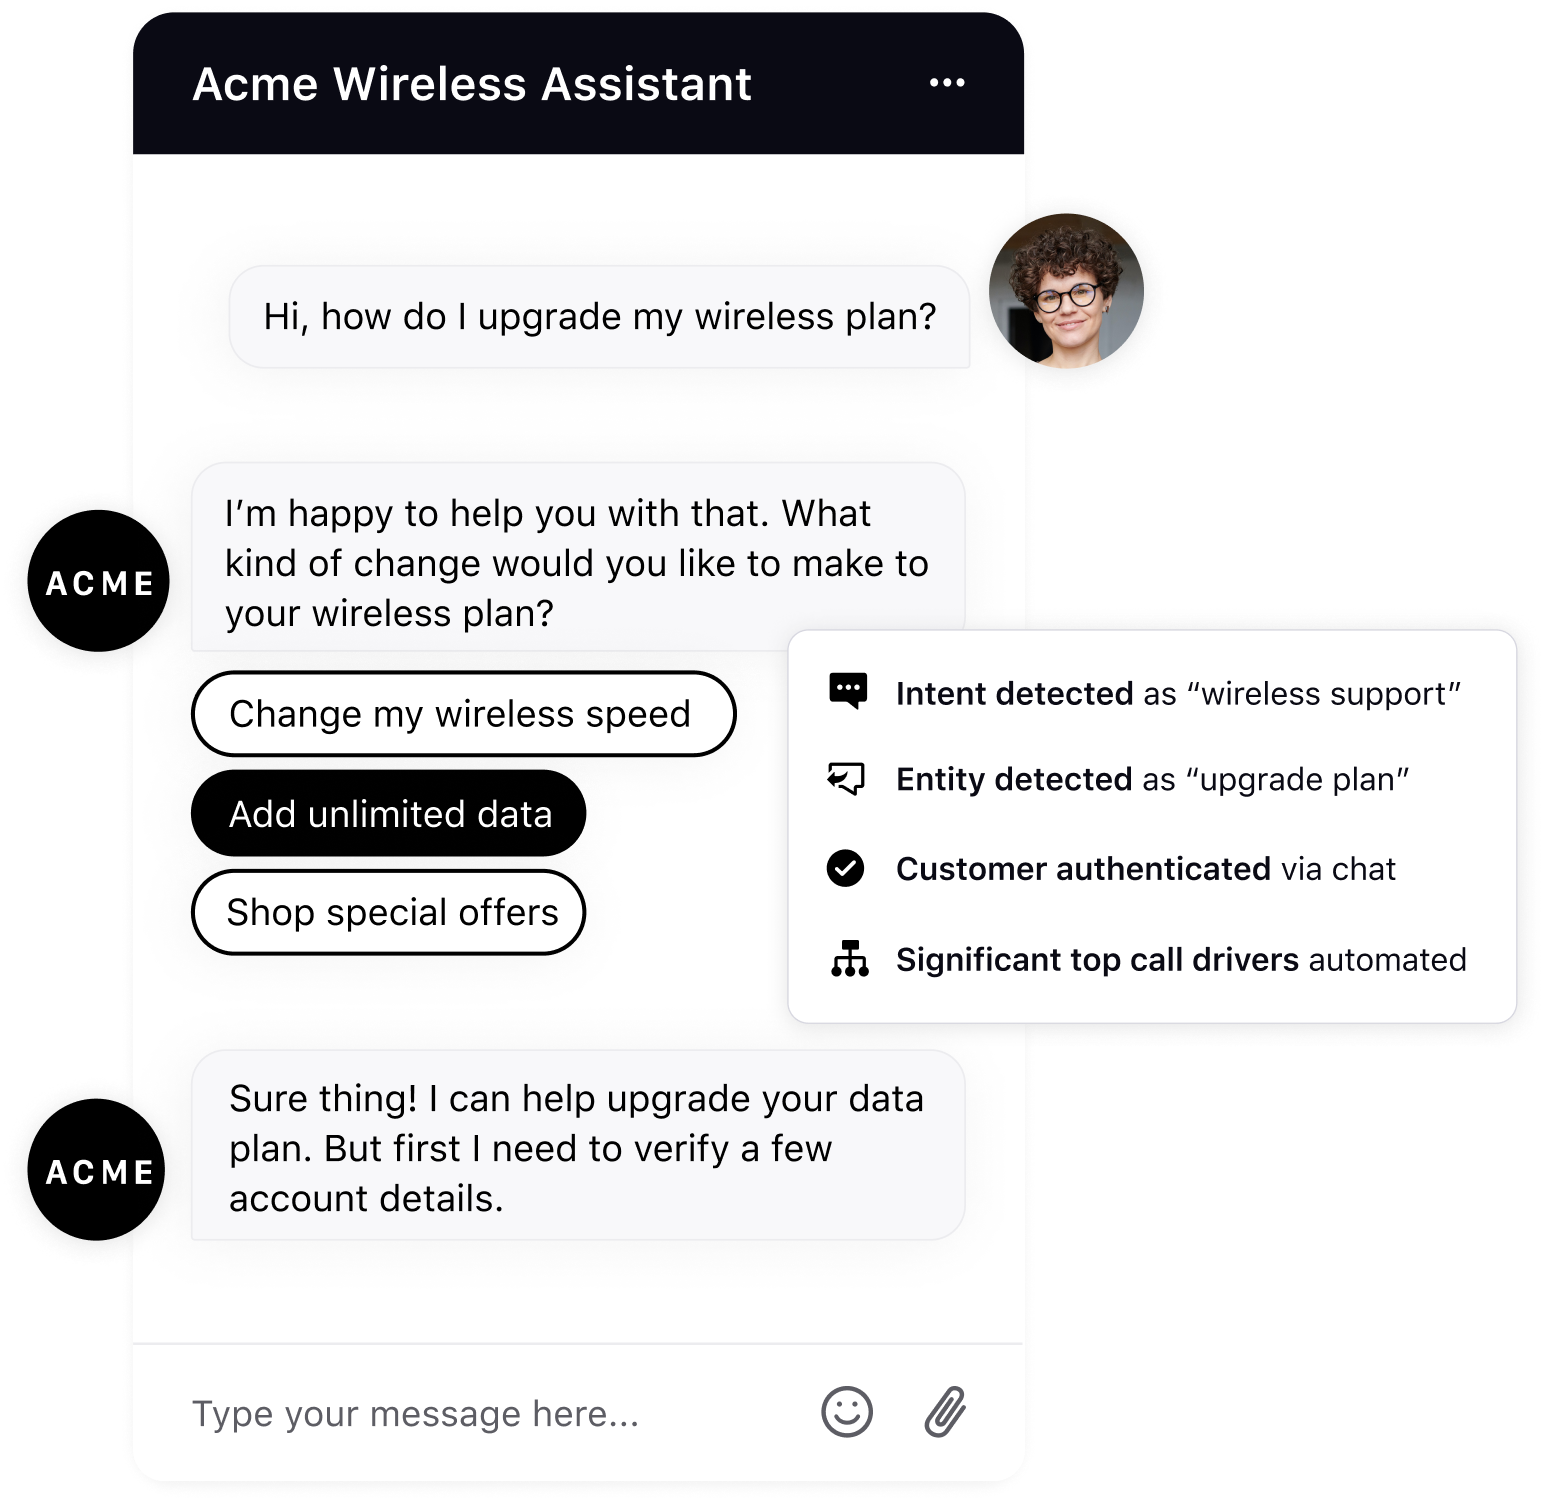 Chat screenshot between a customer and the conversational AI Acme Wireless Assistant to troubleshoot issues